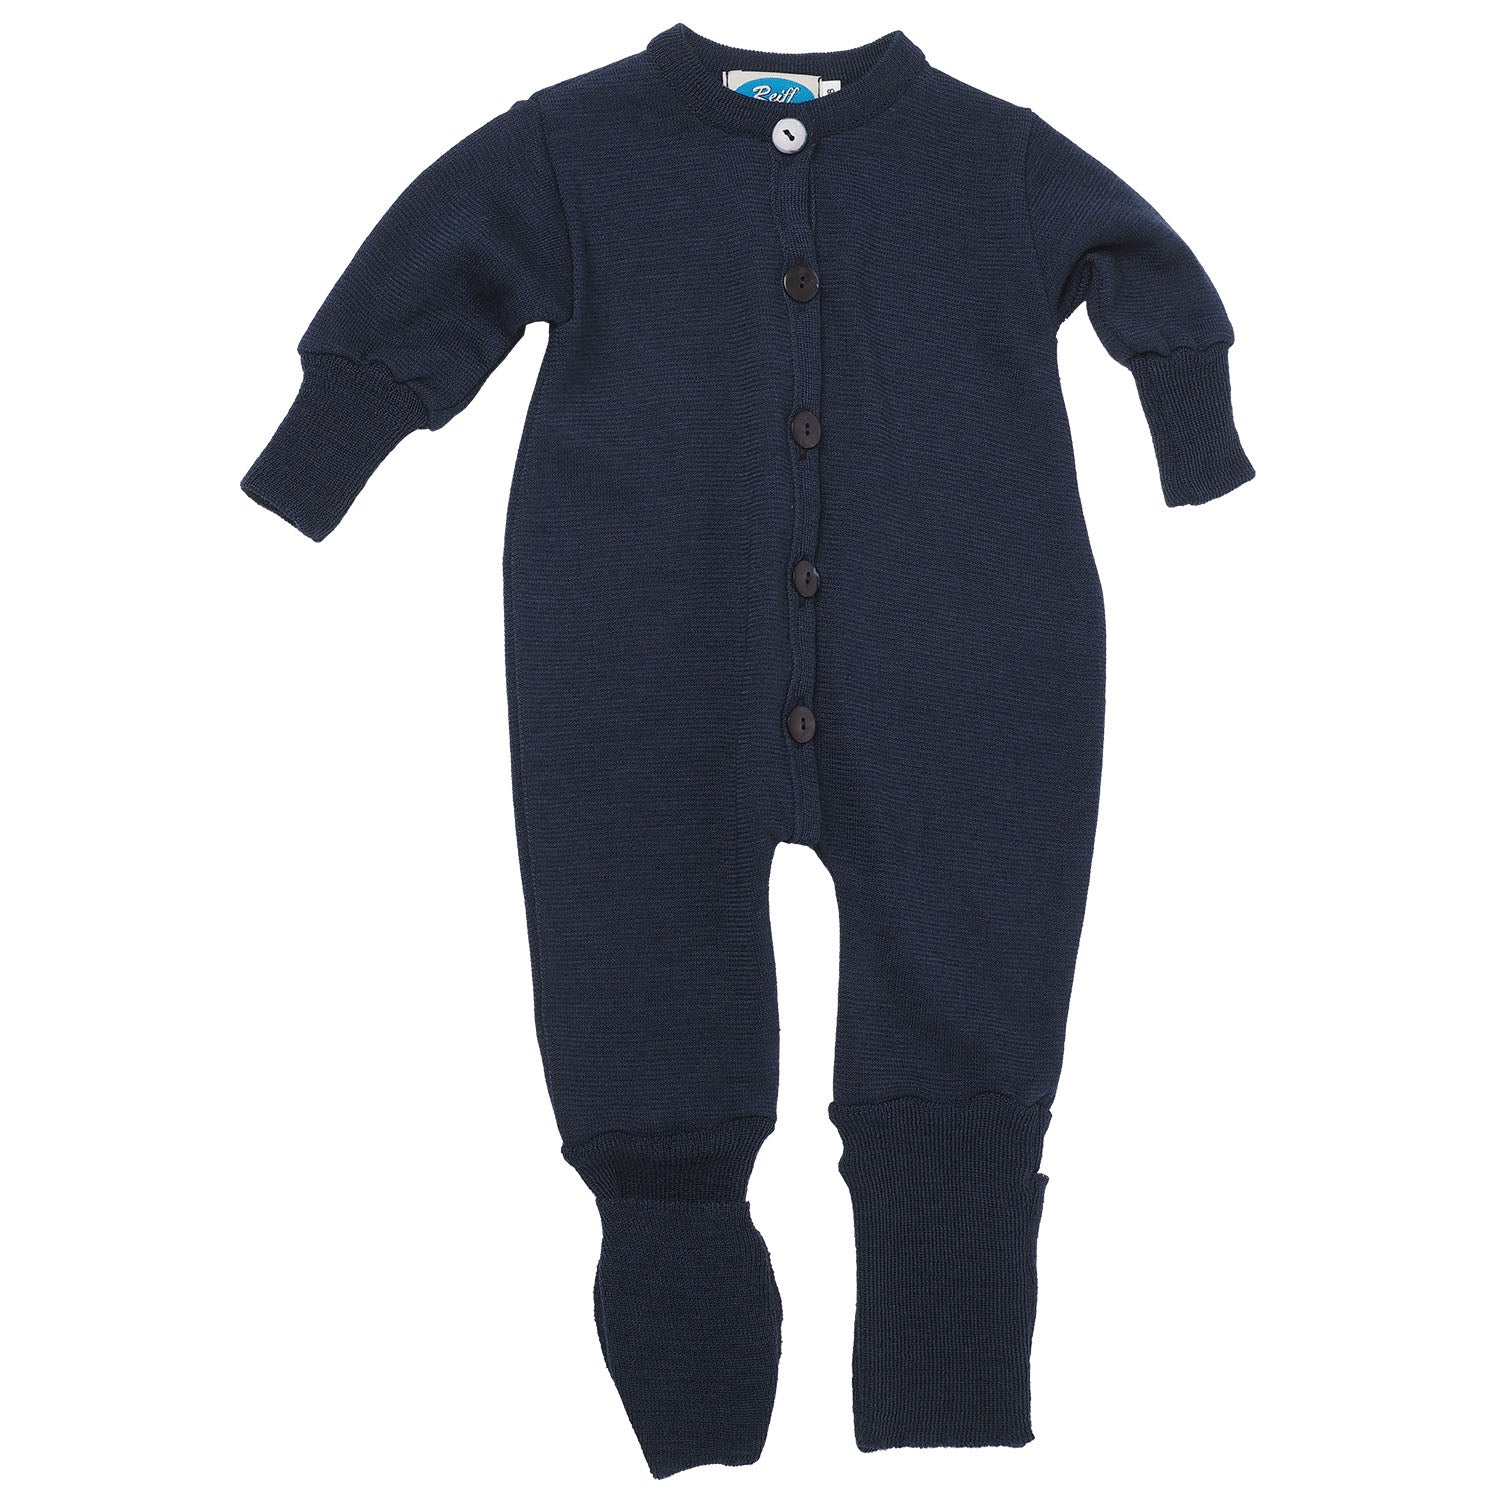 wool knit overall by Reiff in navy